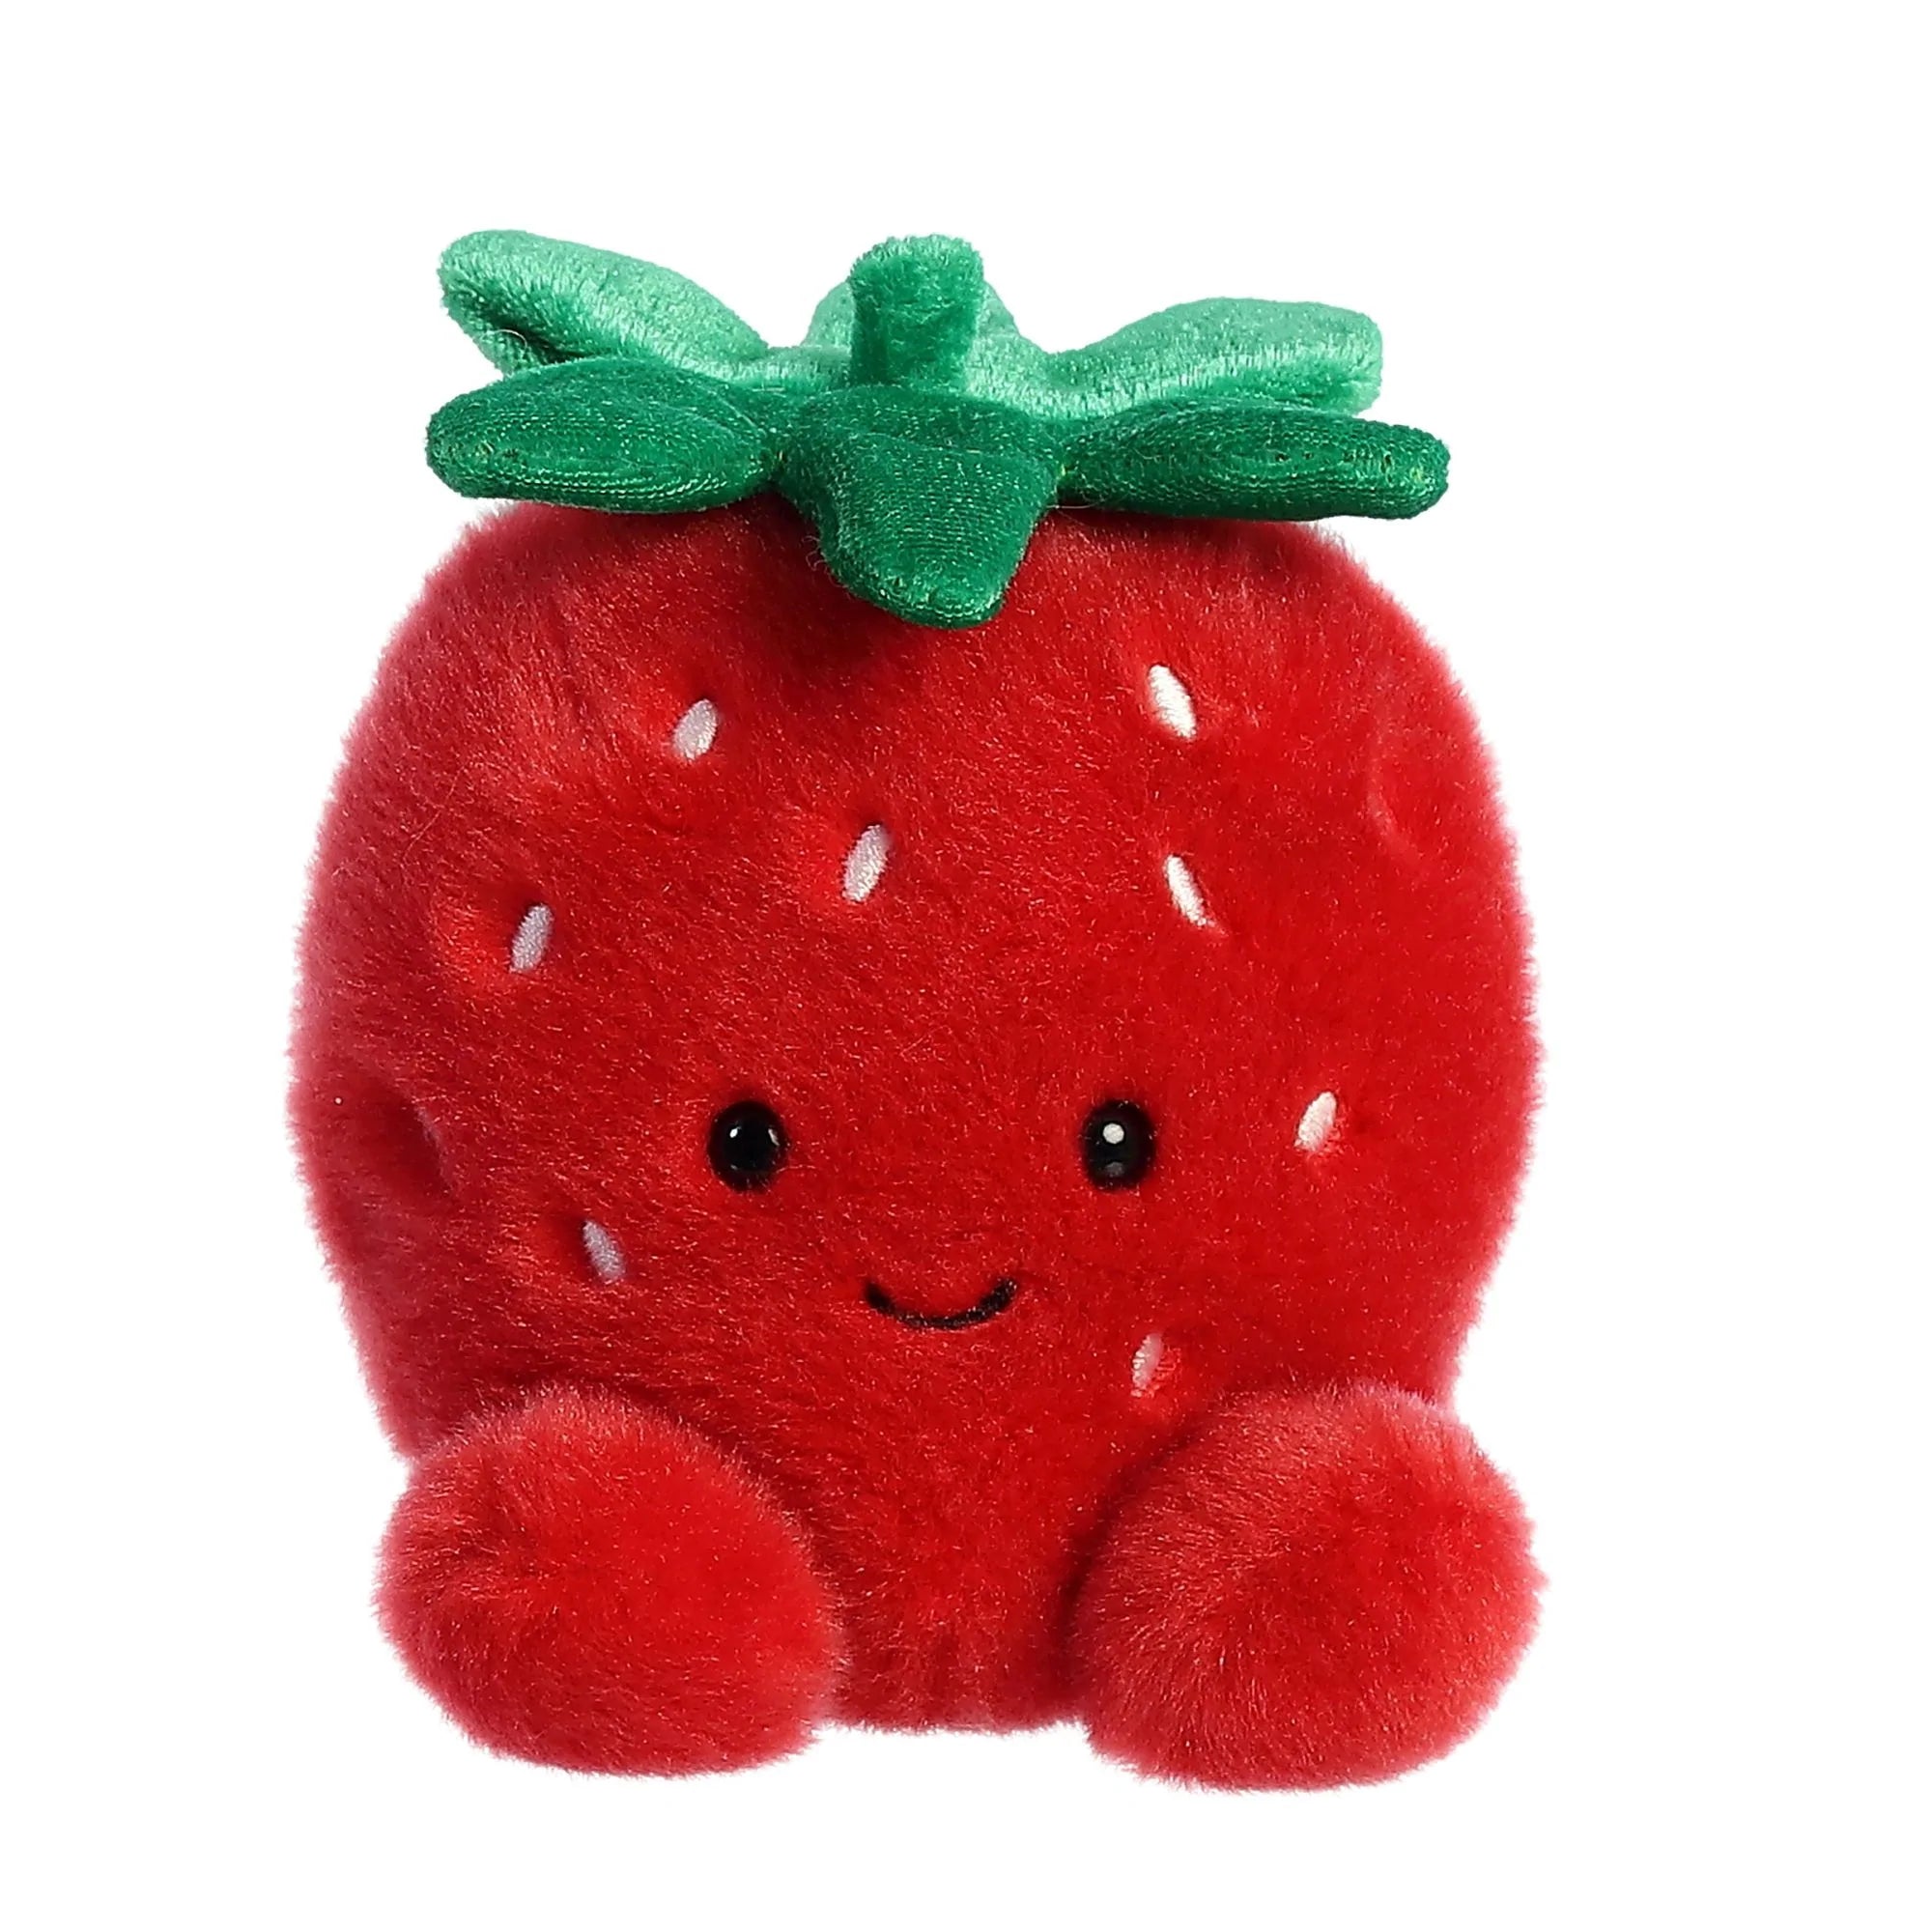 Soft fluffy red strawberry with a green top and very cute little legs.